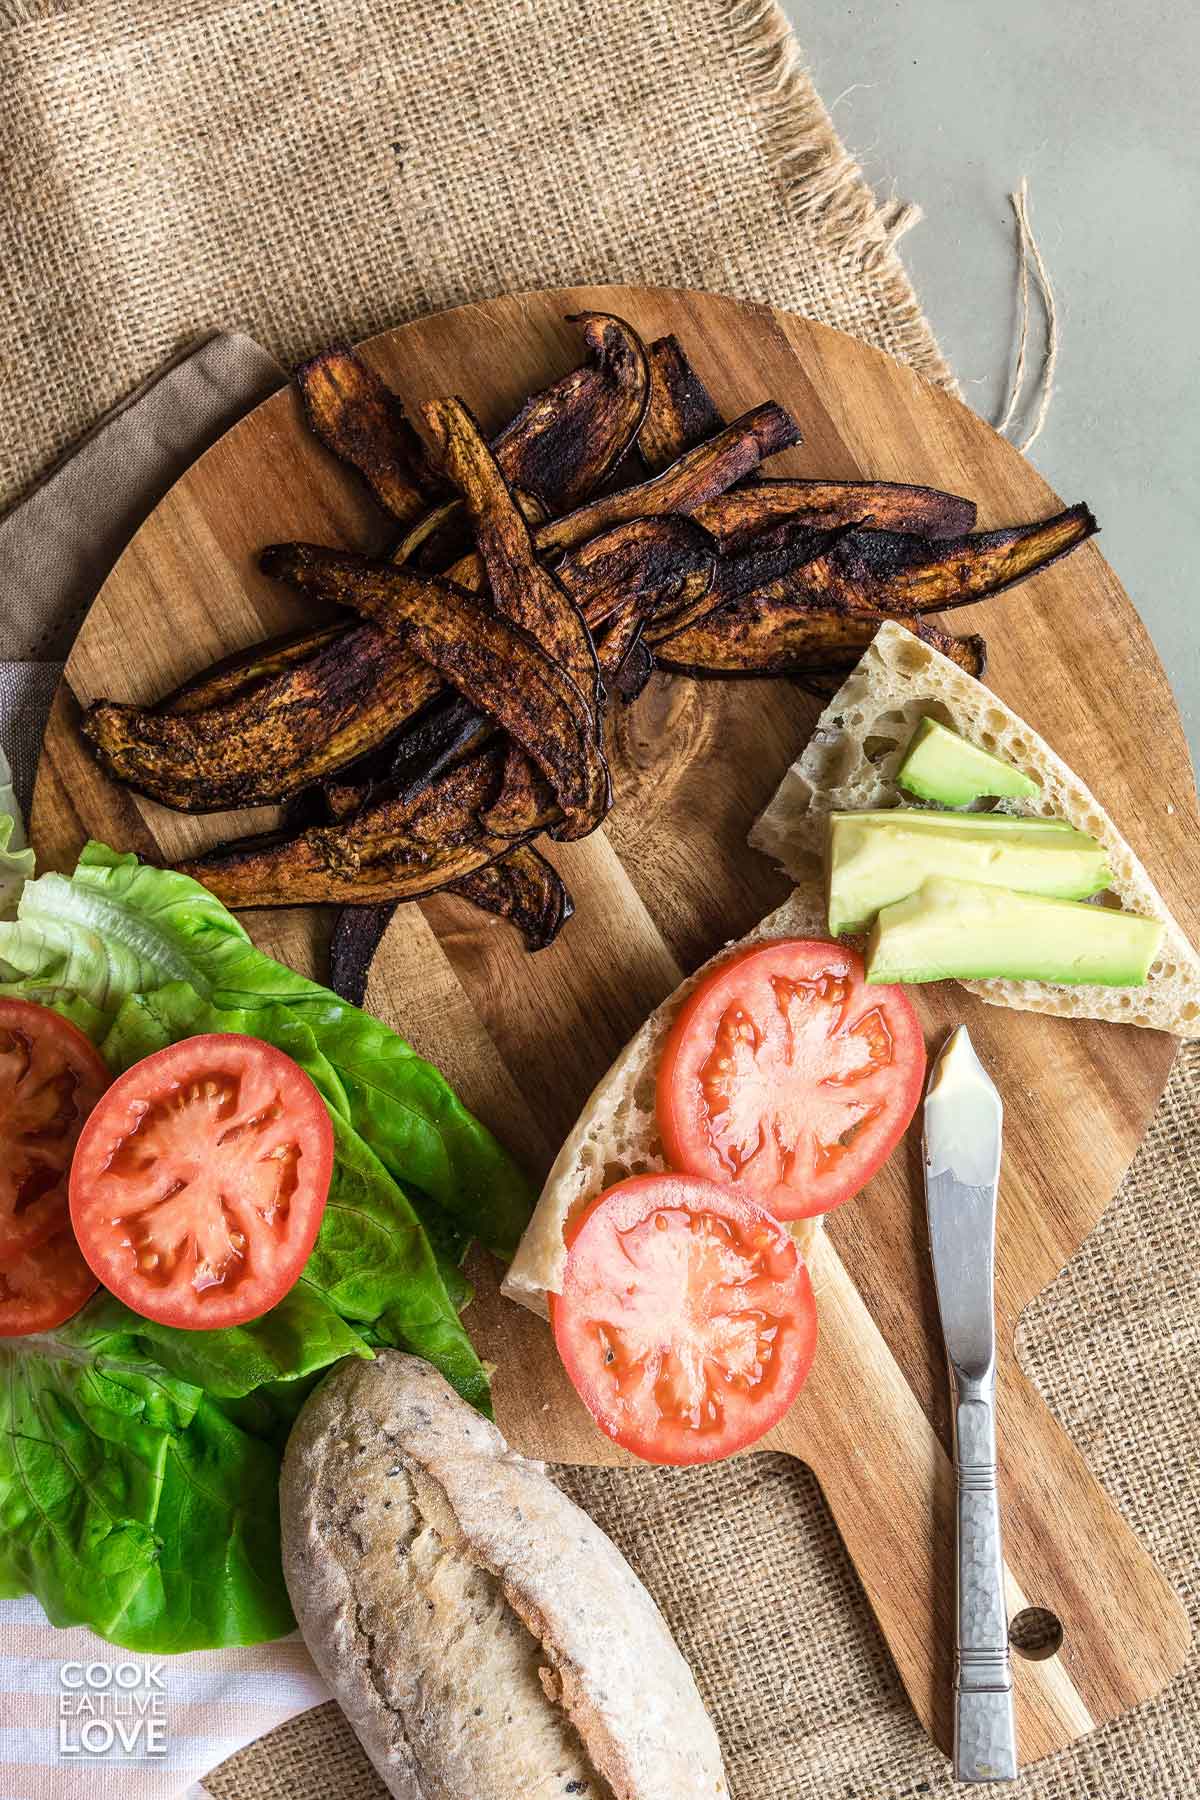 Slices of eggplant bacon on a cutting board with ingredients to make a sandwich.